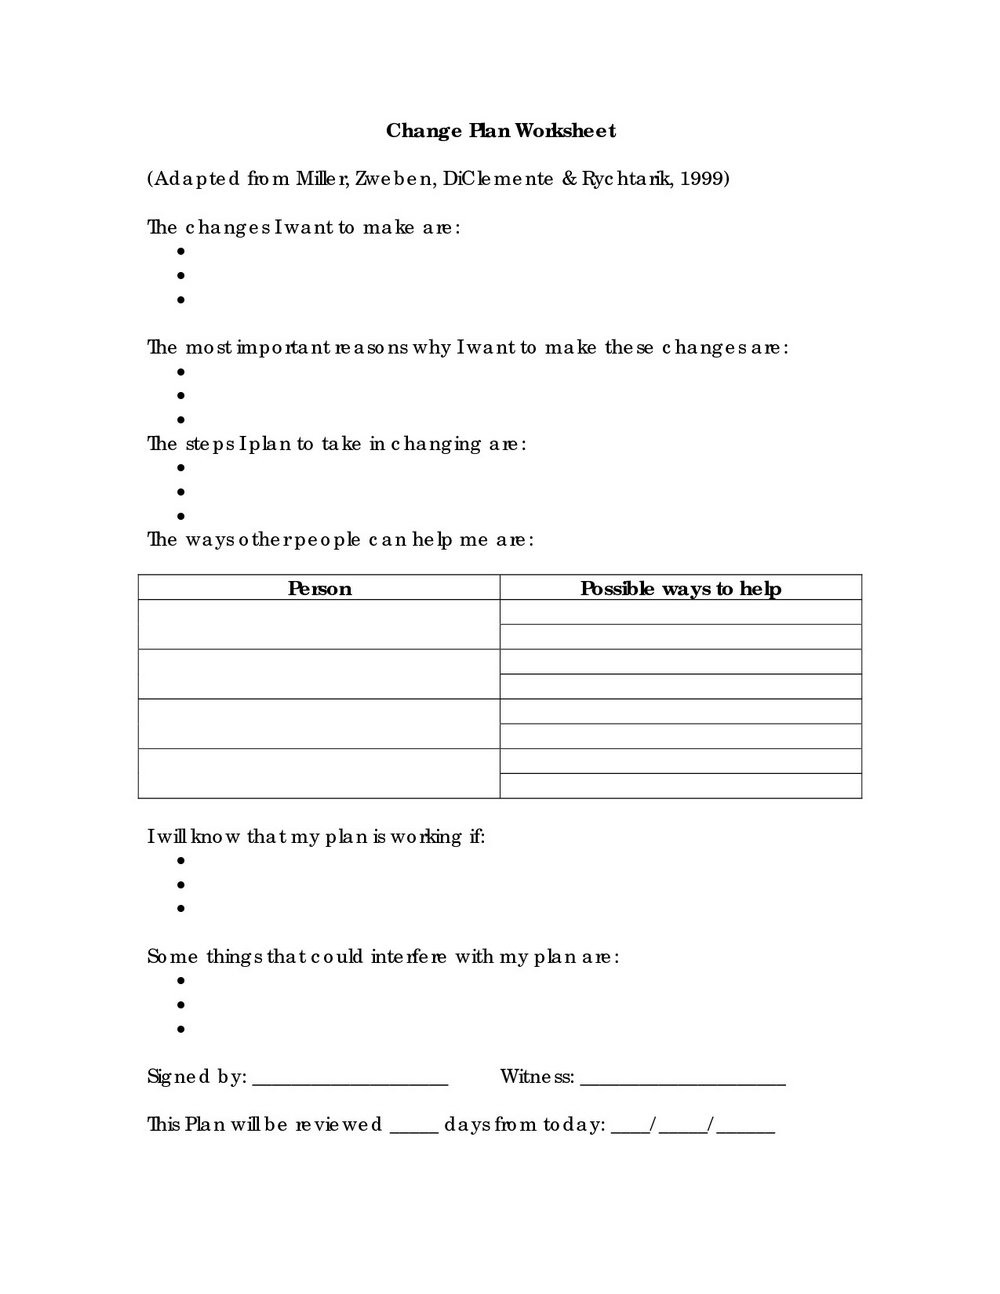 Substance Abuse Worksheets For Adults Pdf db excel com